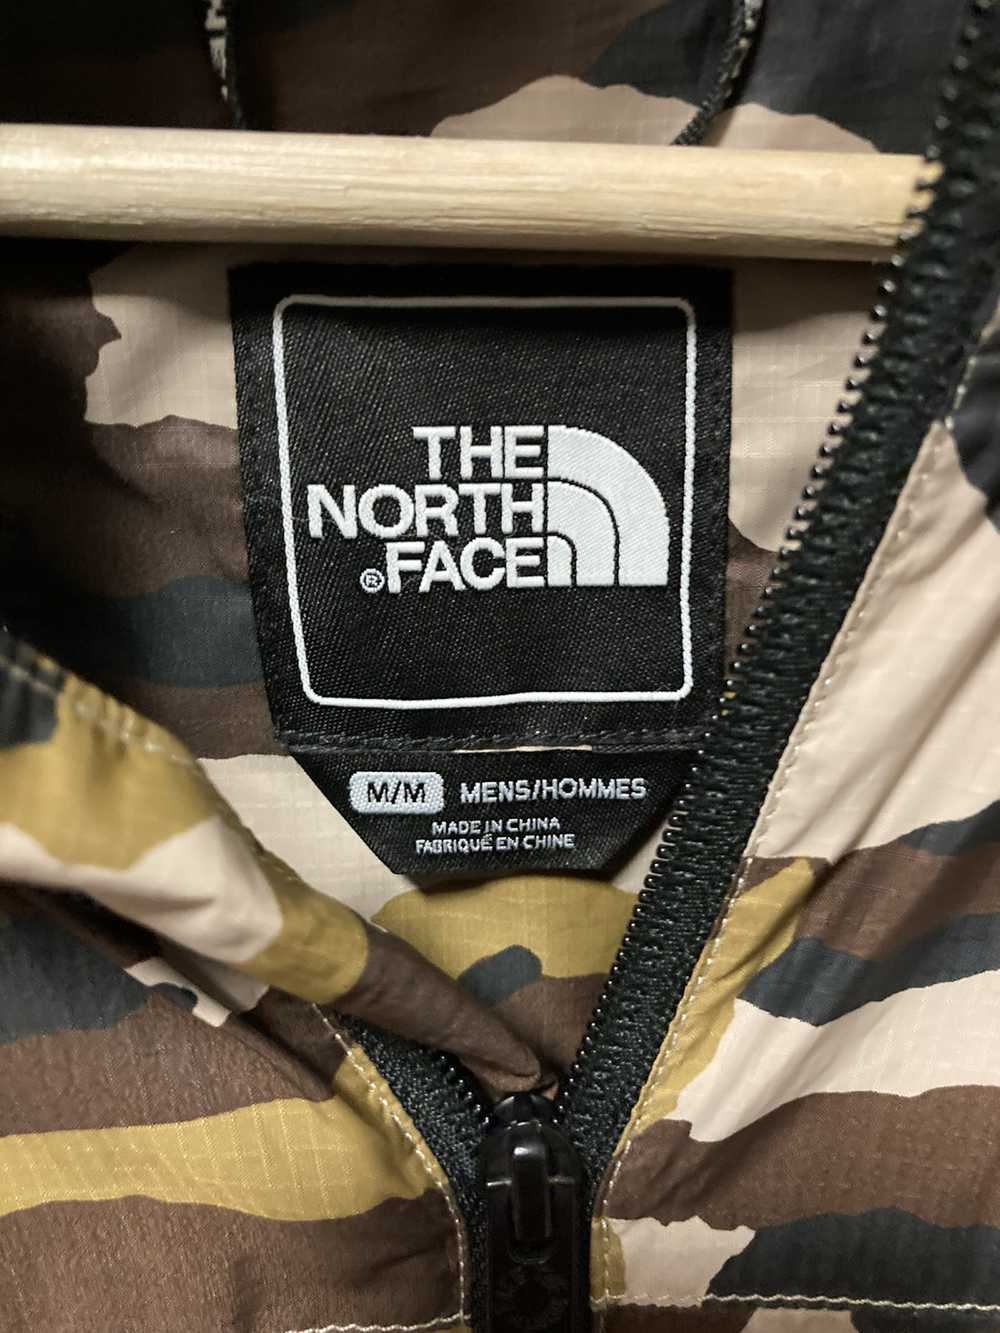 The North Face The north face camo zip up jacket - image 3